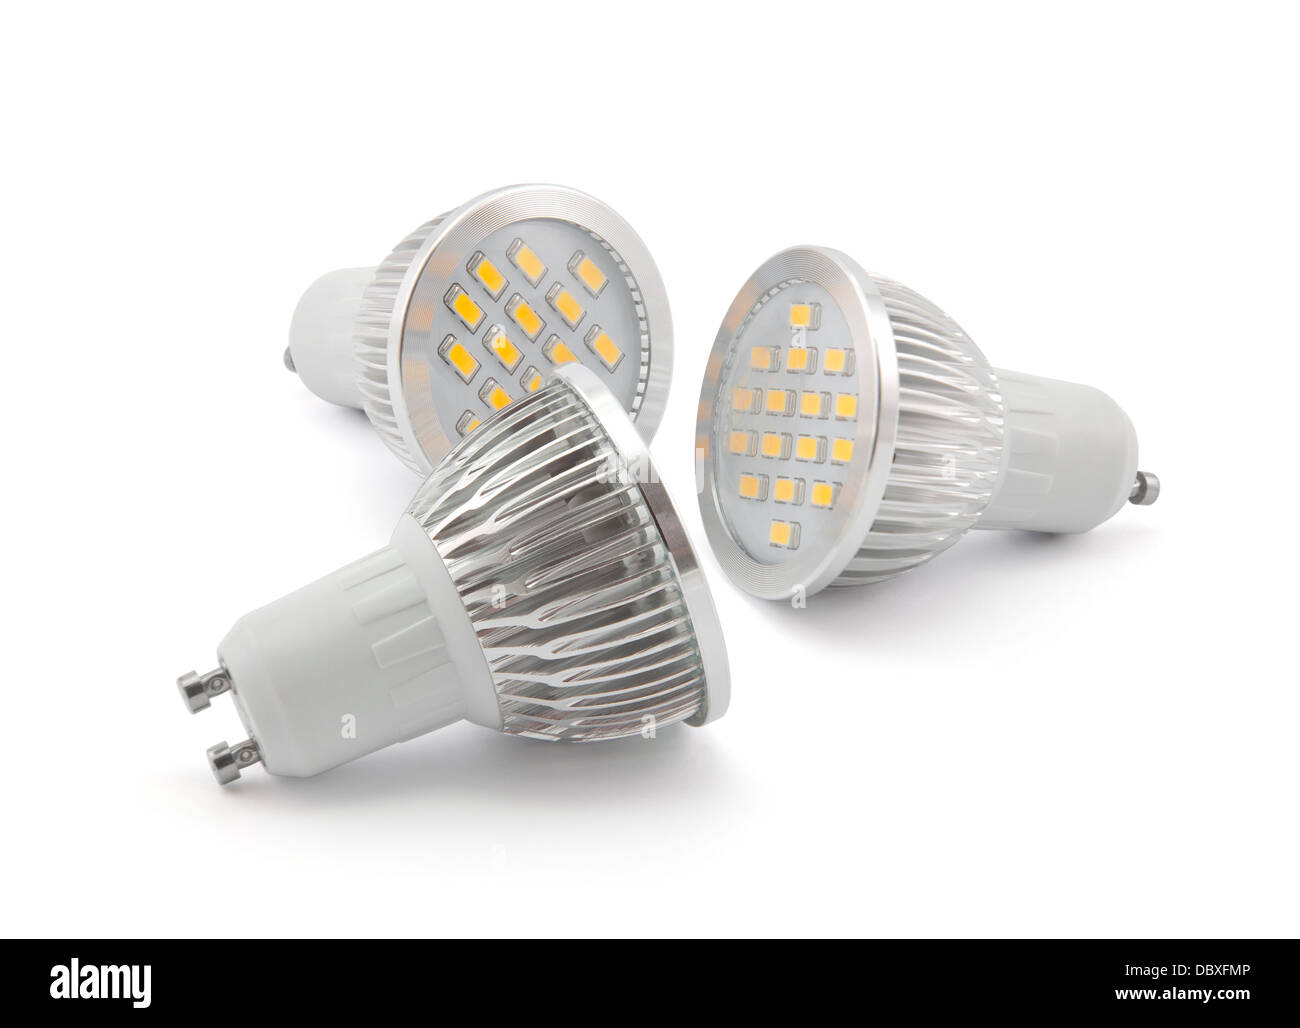 Led light bulbs with clipping path Stock Photo